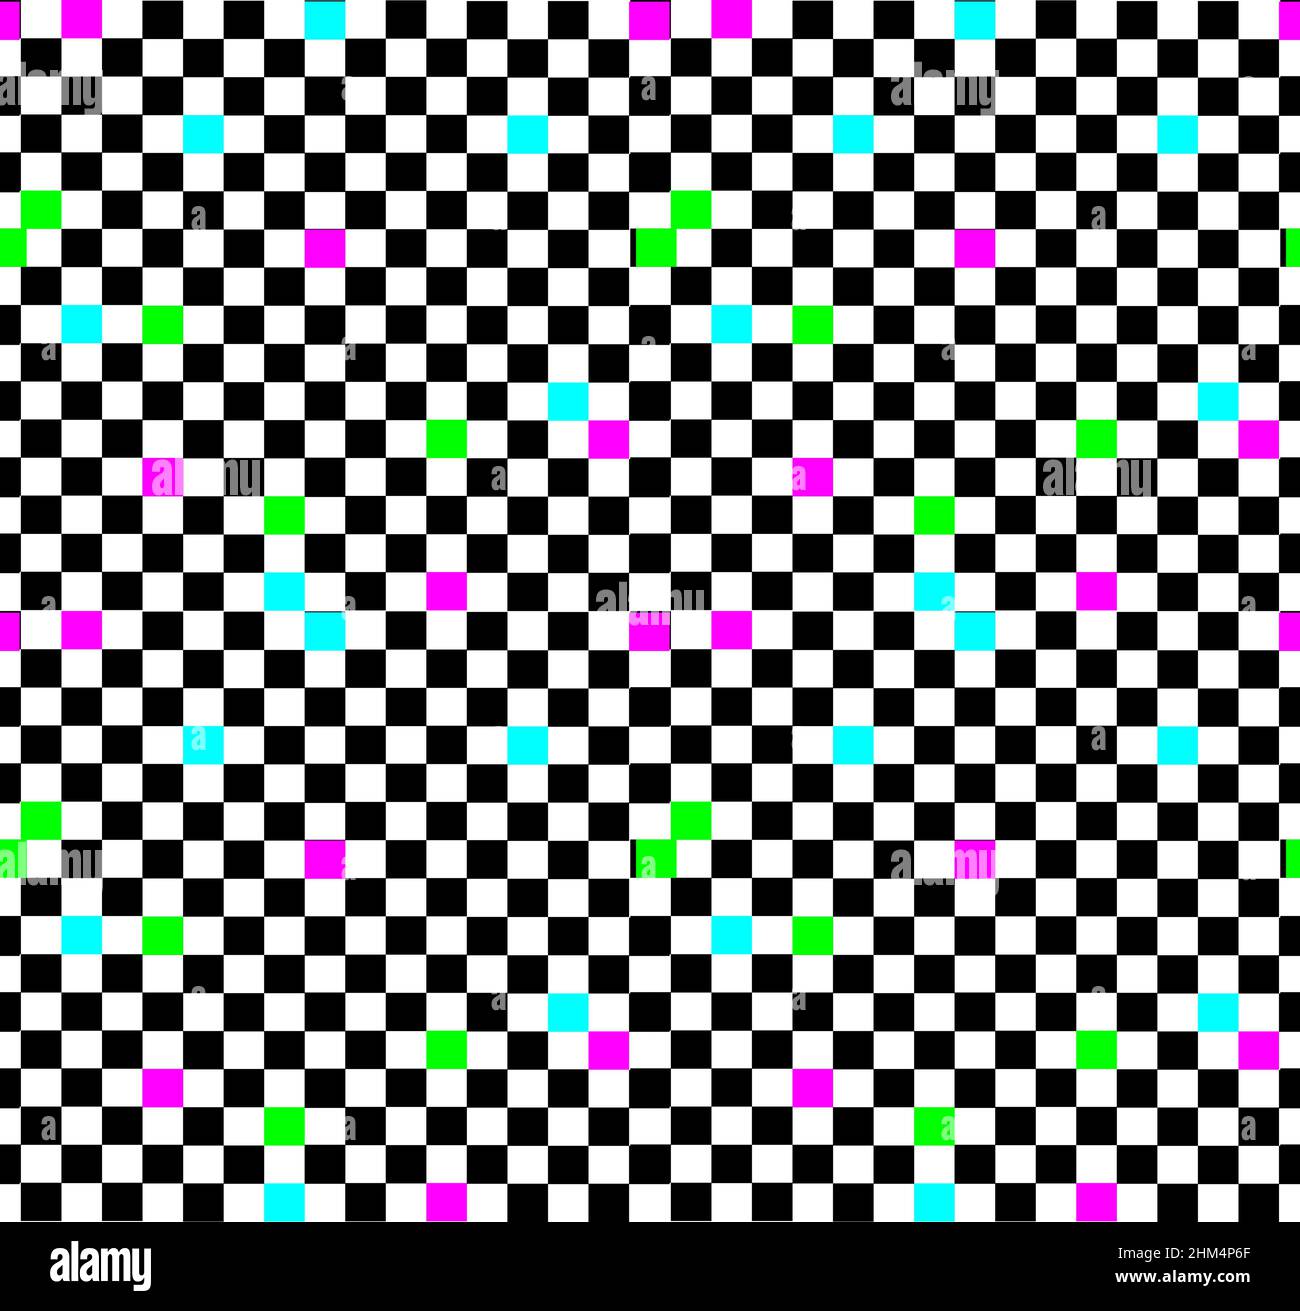 No Signal TV retro television test pattern with color RGB Bars and VHS glitch effect. Vaporwave and retrowave style background Stock Vector